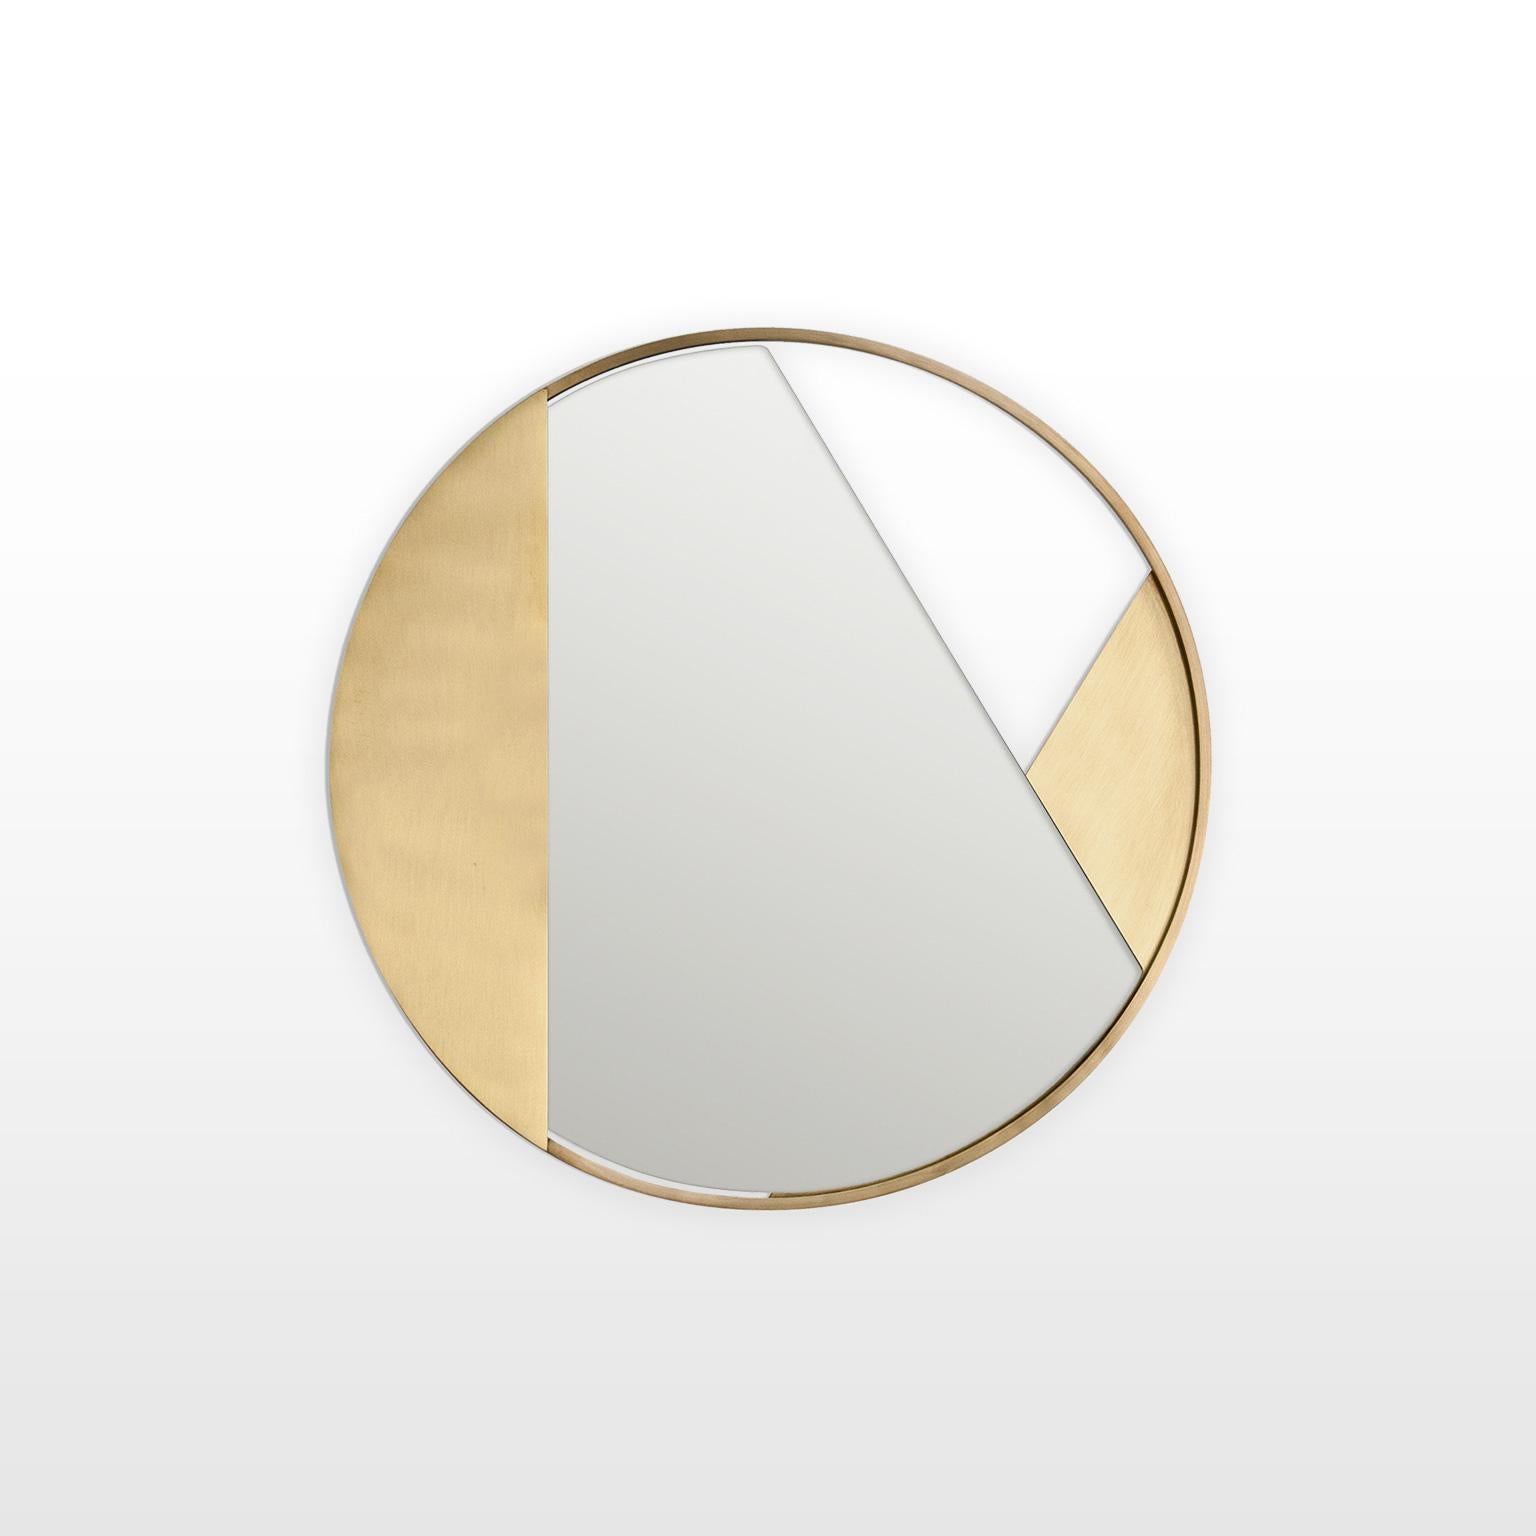 Revolution V2 is a 21st Century mirror of 55 cm diameter, made by Italian artisans in different shades and colors. The piece is manufactured in a limited edition of 1000 signed and progressively numbered examples. It is part of the collectible